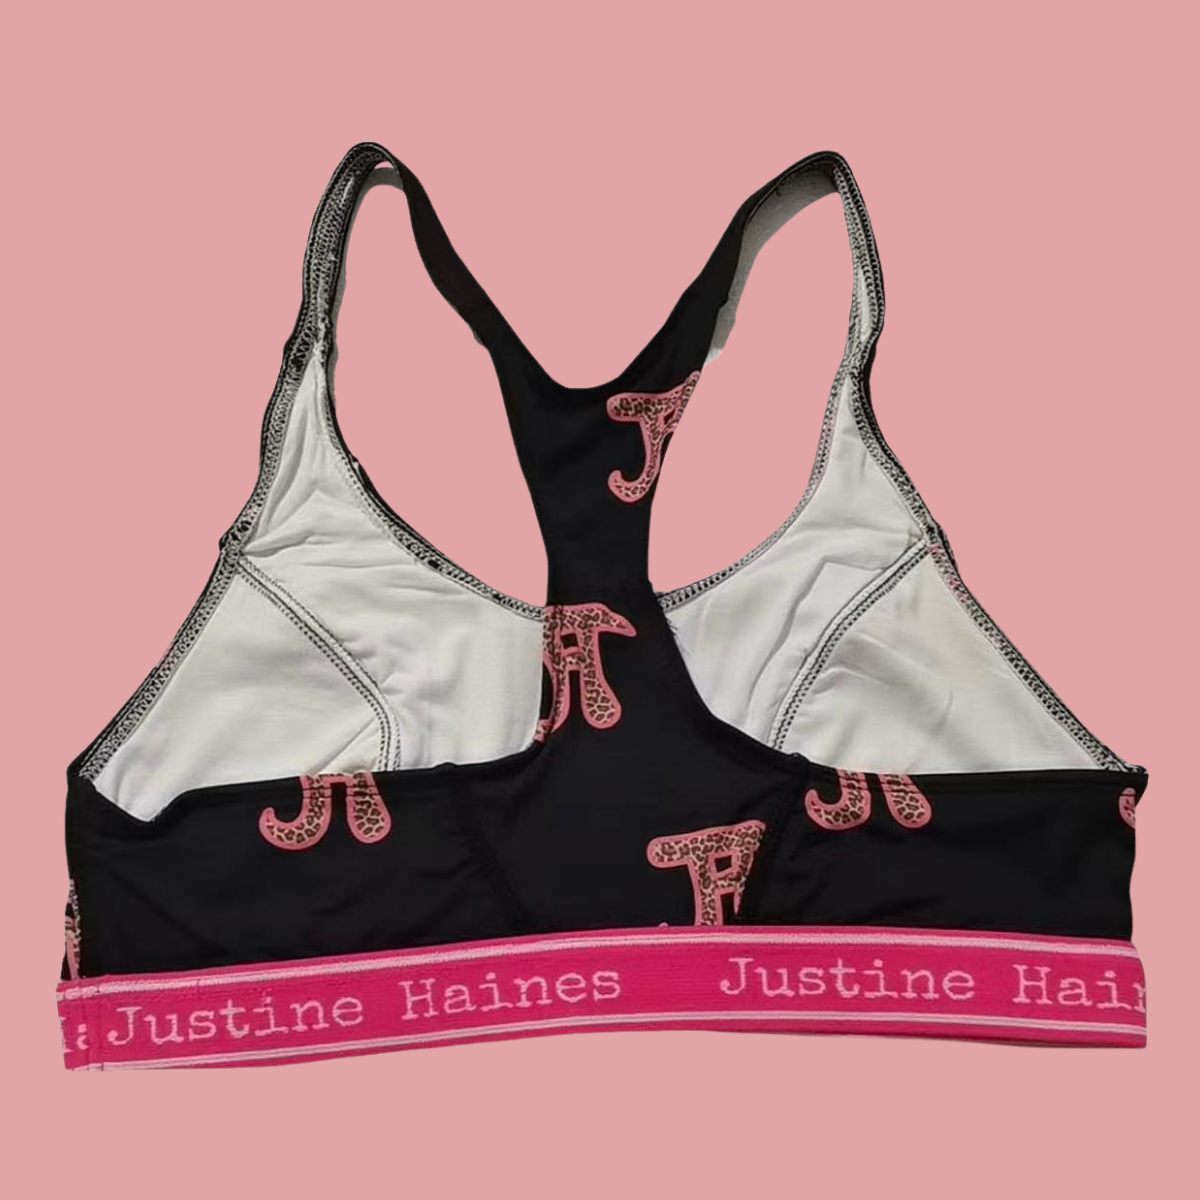 https://www.justinehaines.com/products/full-coverage-t-back-racer-sports-bra-in-jh-logo-with-leopard